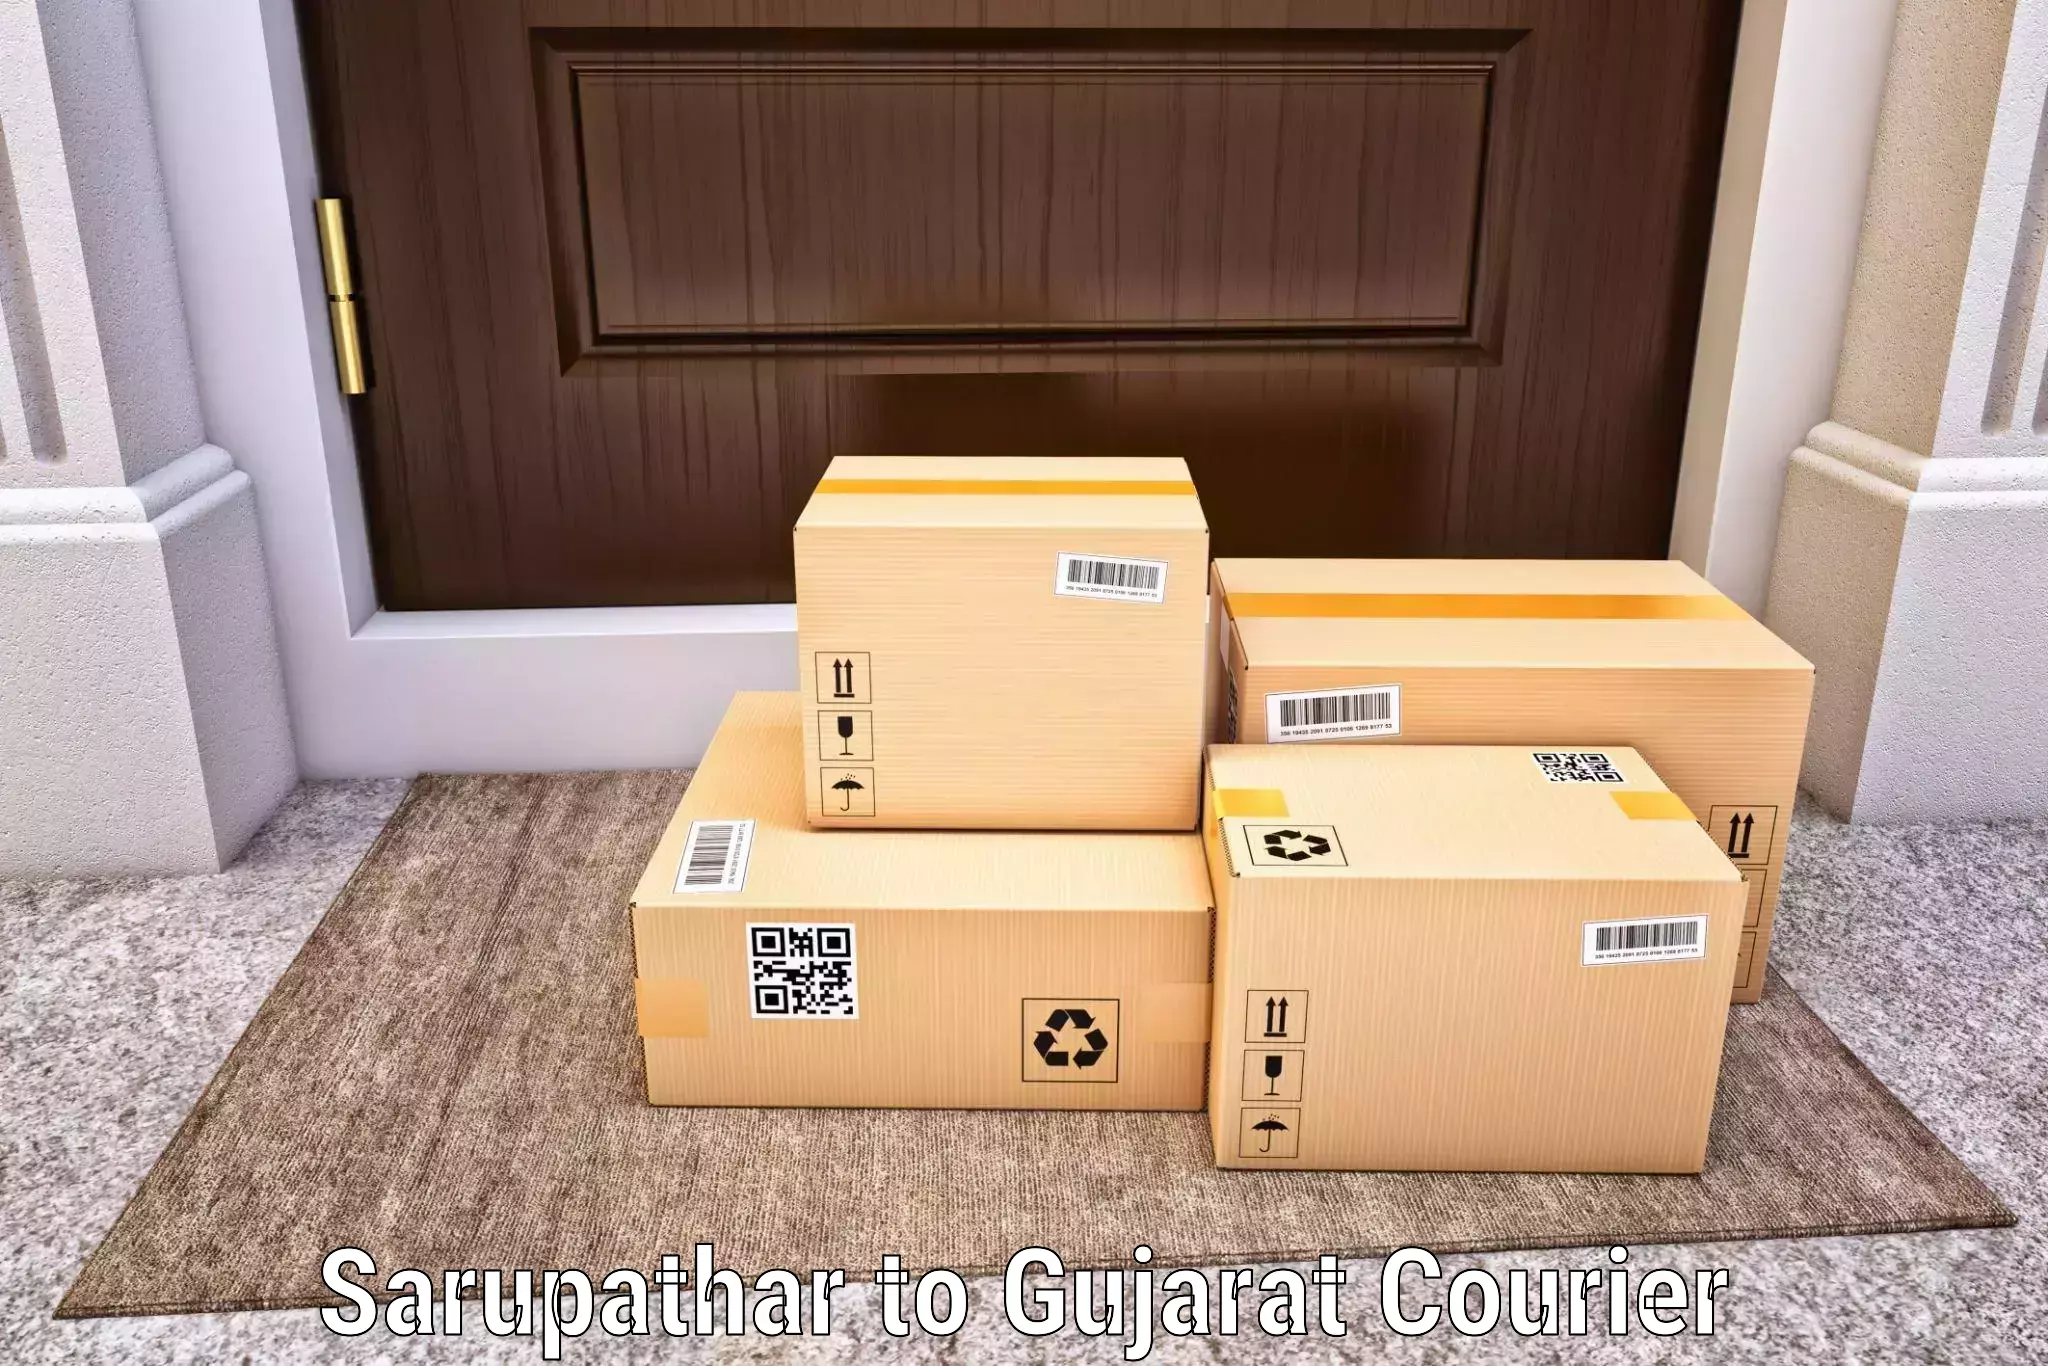 Cash on delivery service in Sarupathar to Gujarat